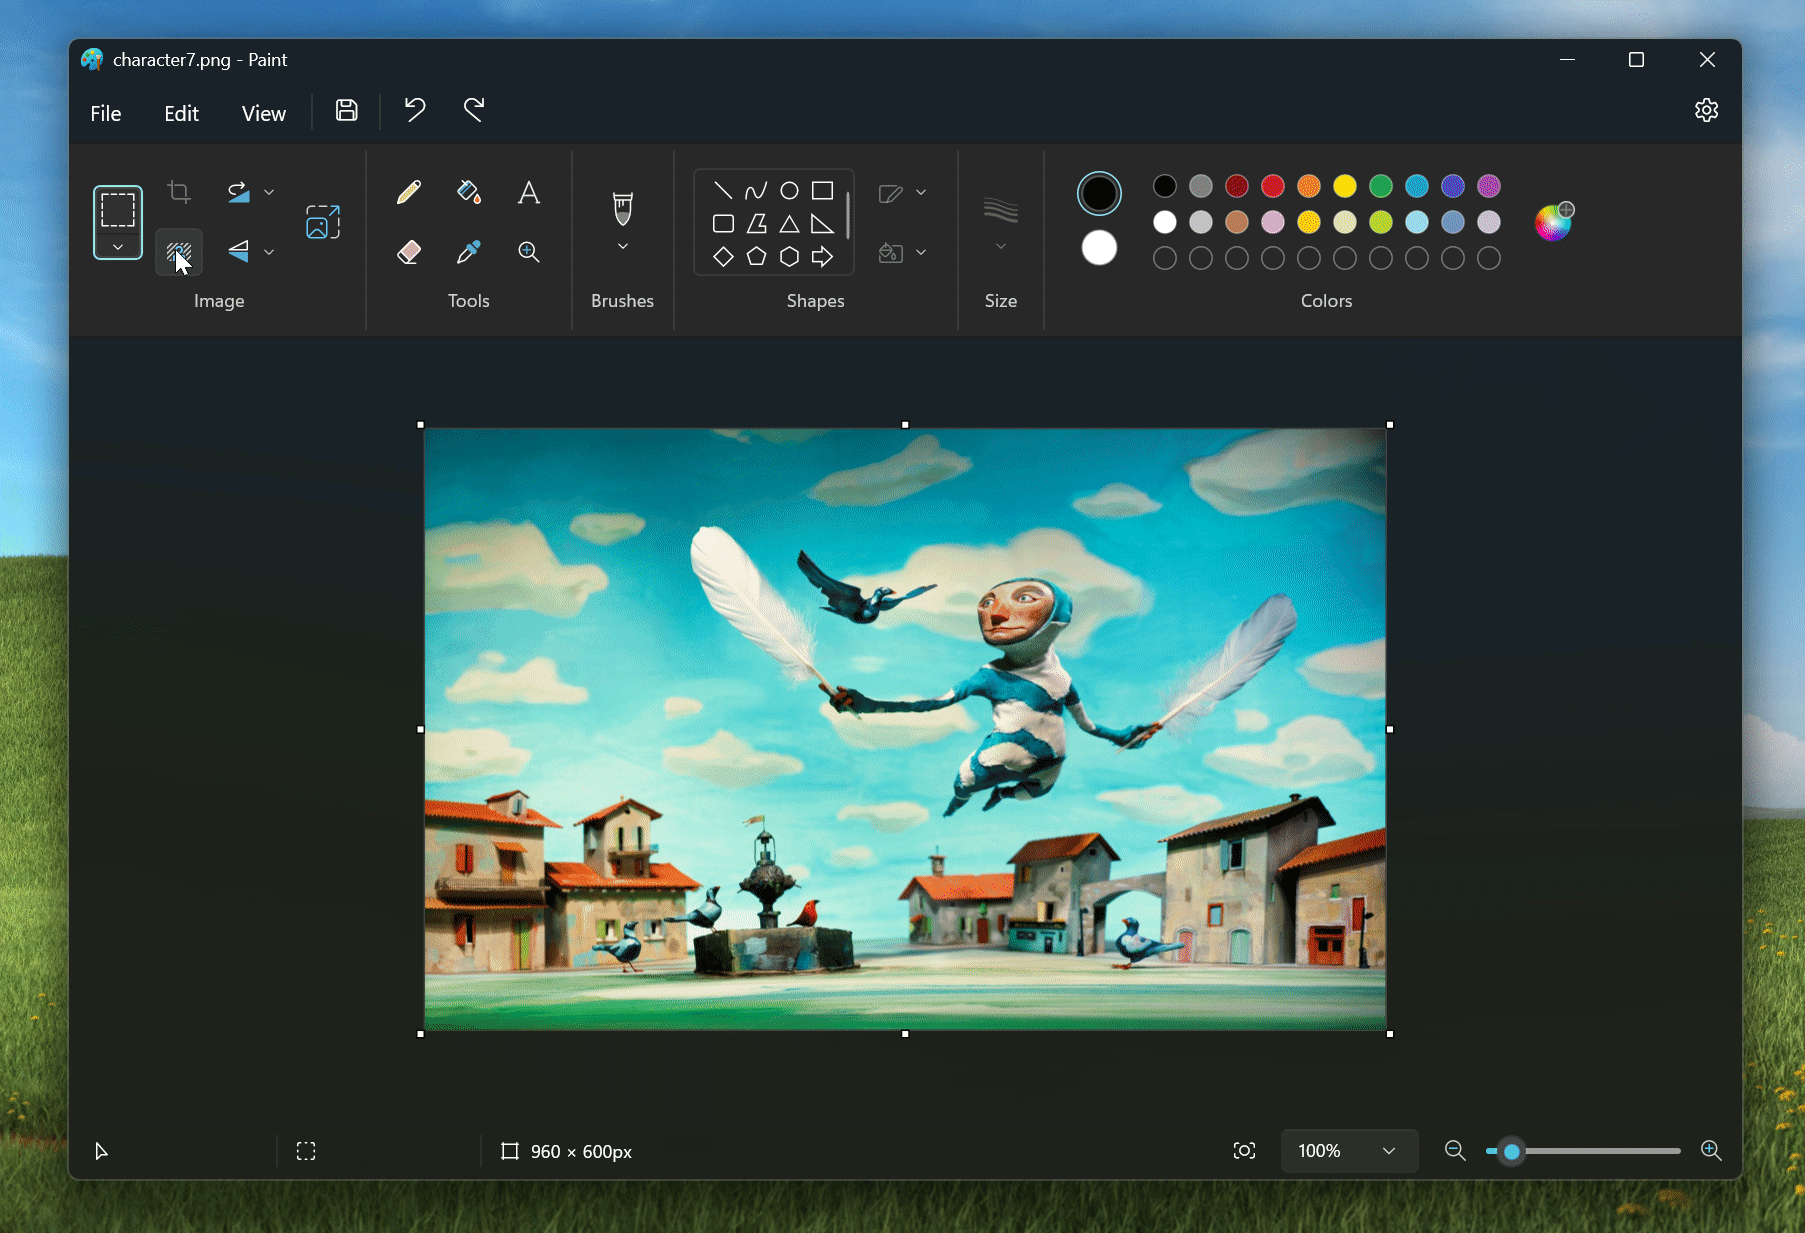 Windows 11's Microsoft Paint gets background removal tool